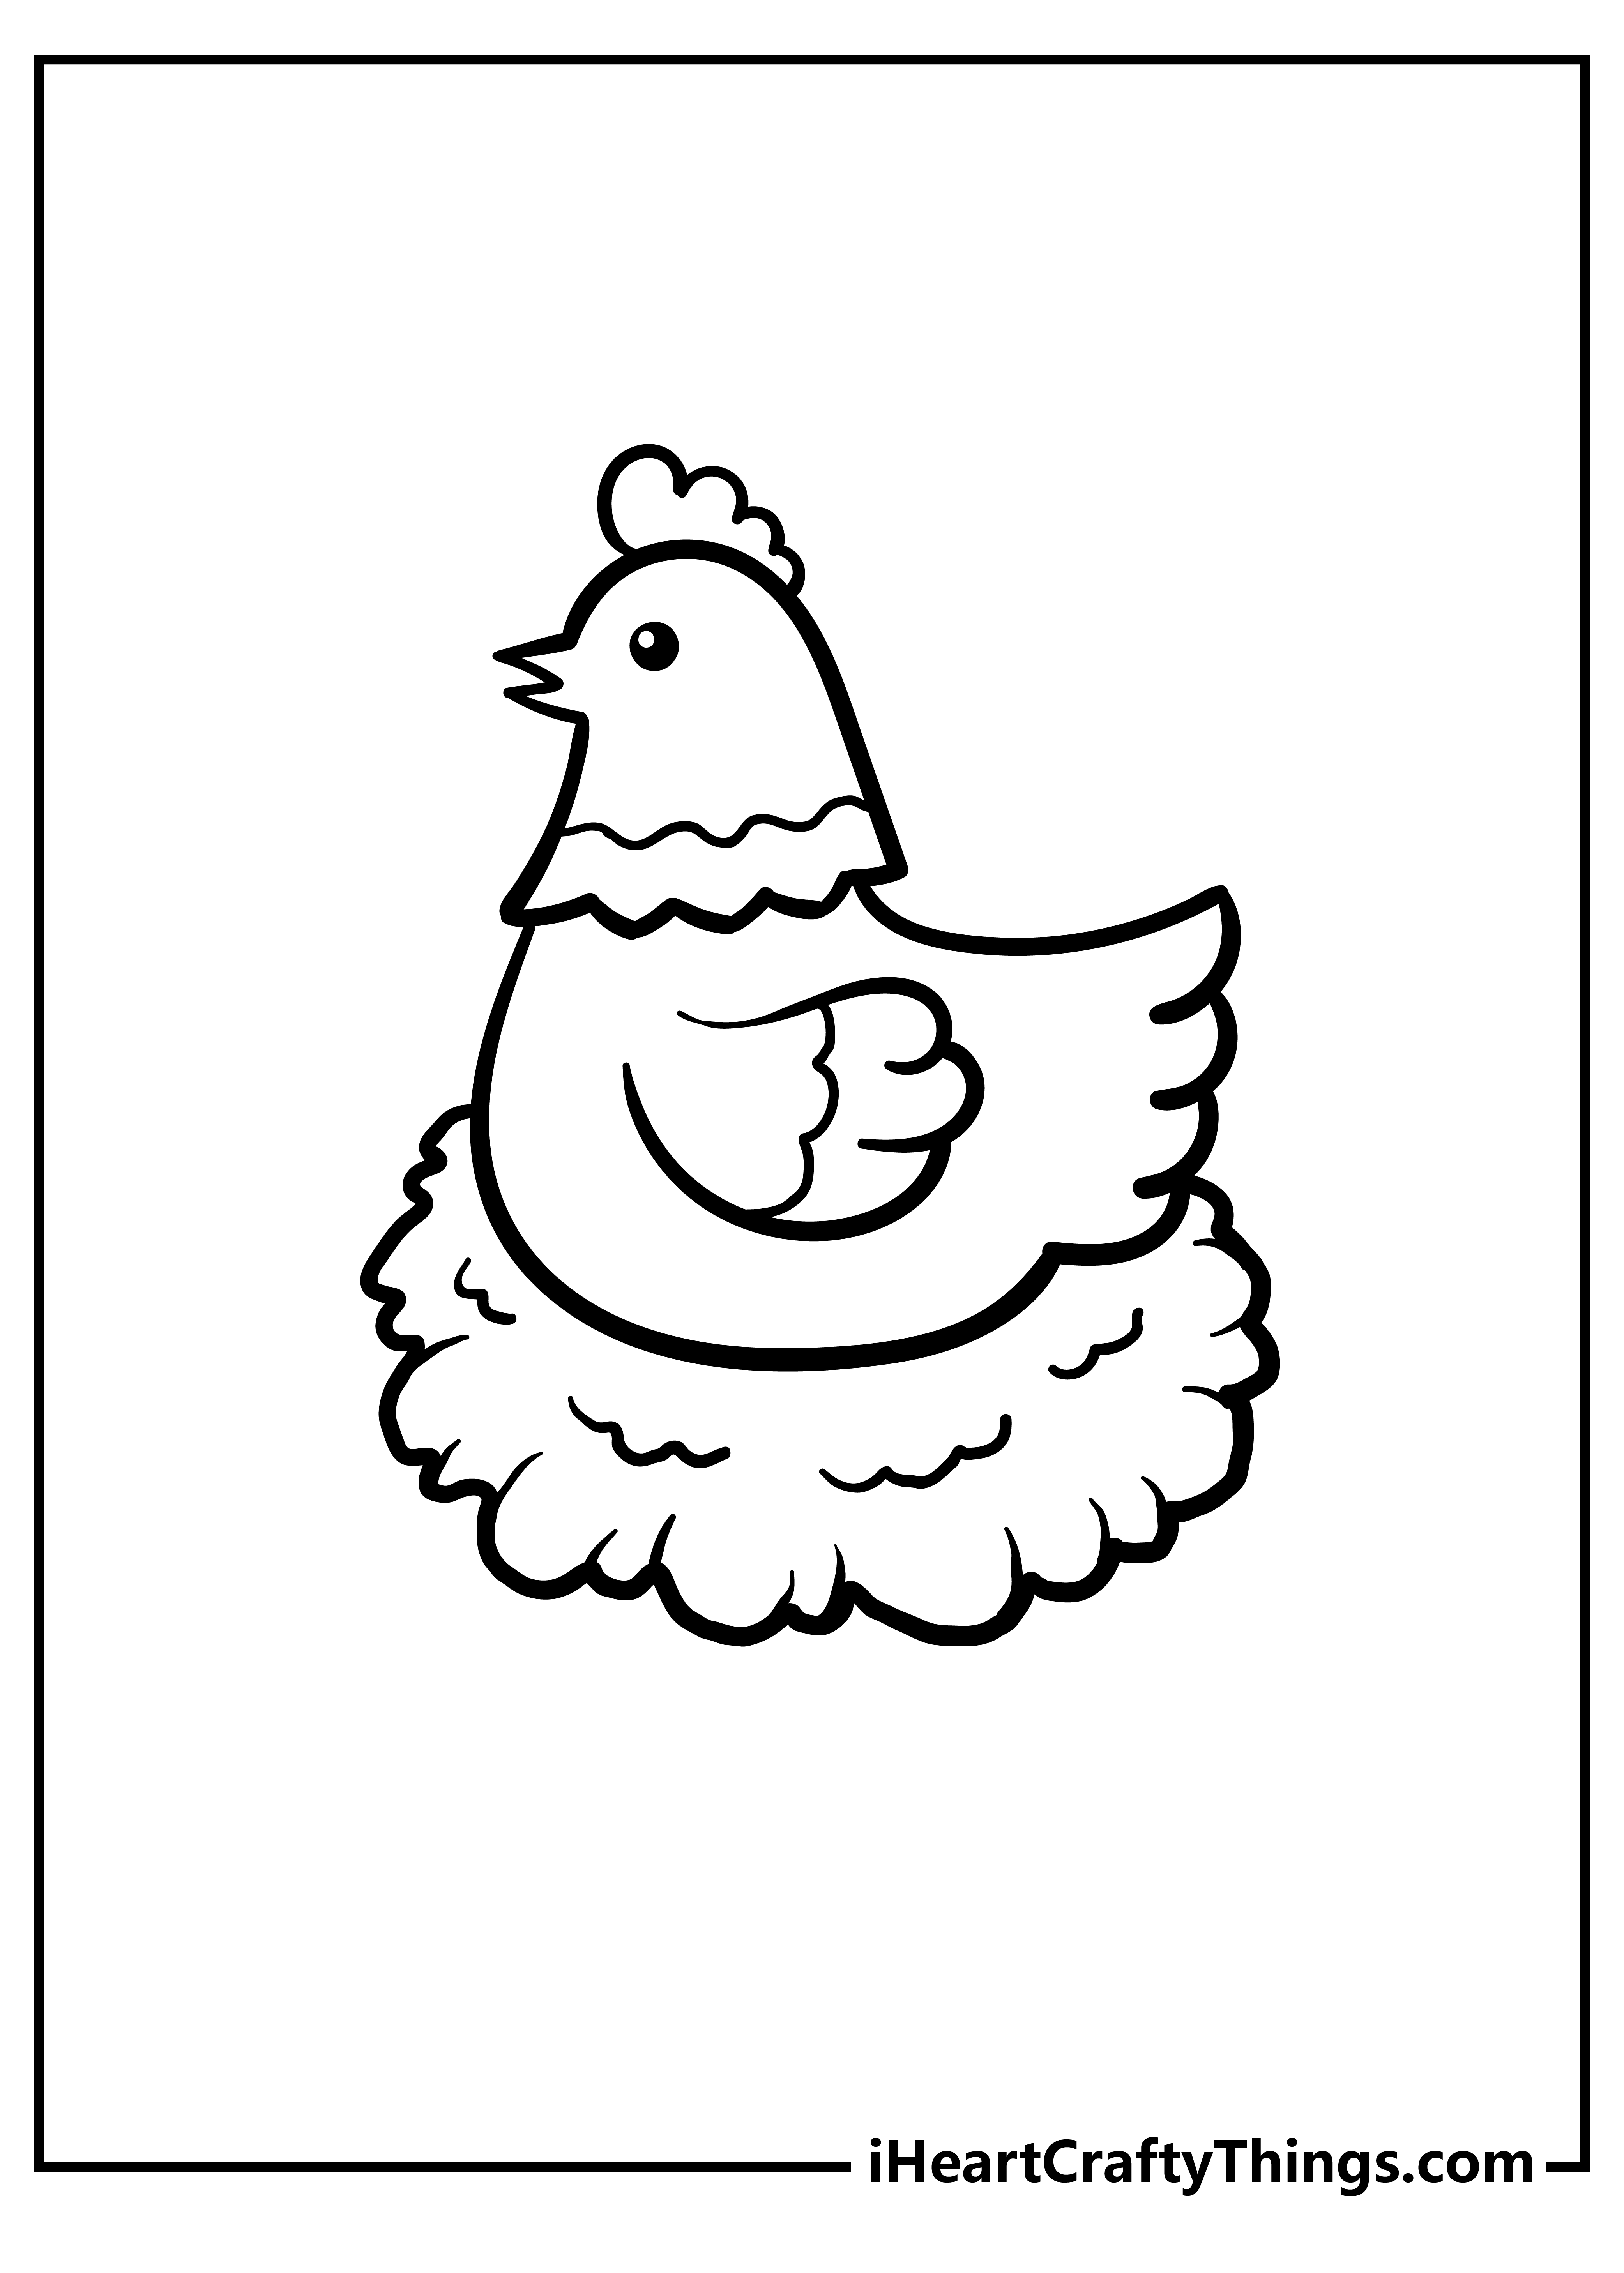 Chicken Easy Coloring Pages